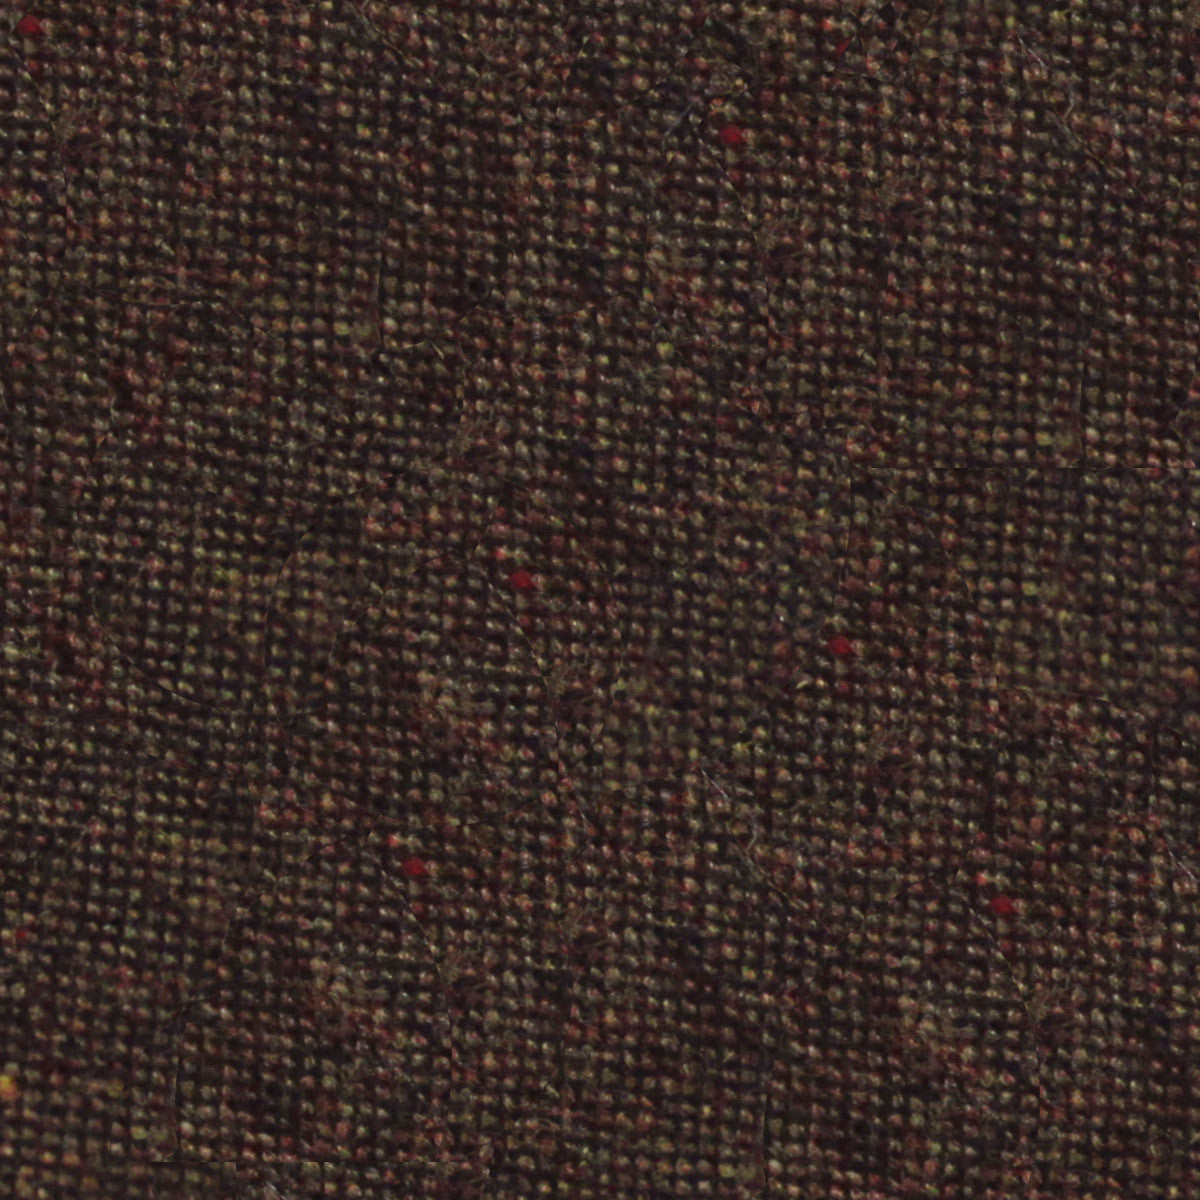 Brown Columbia Wool Fabric Pocket Square